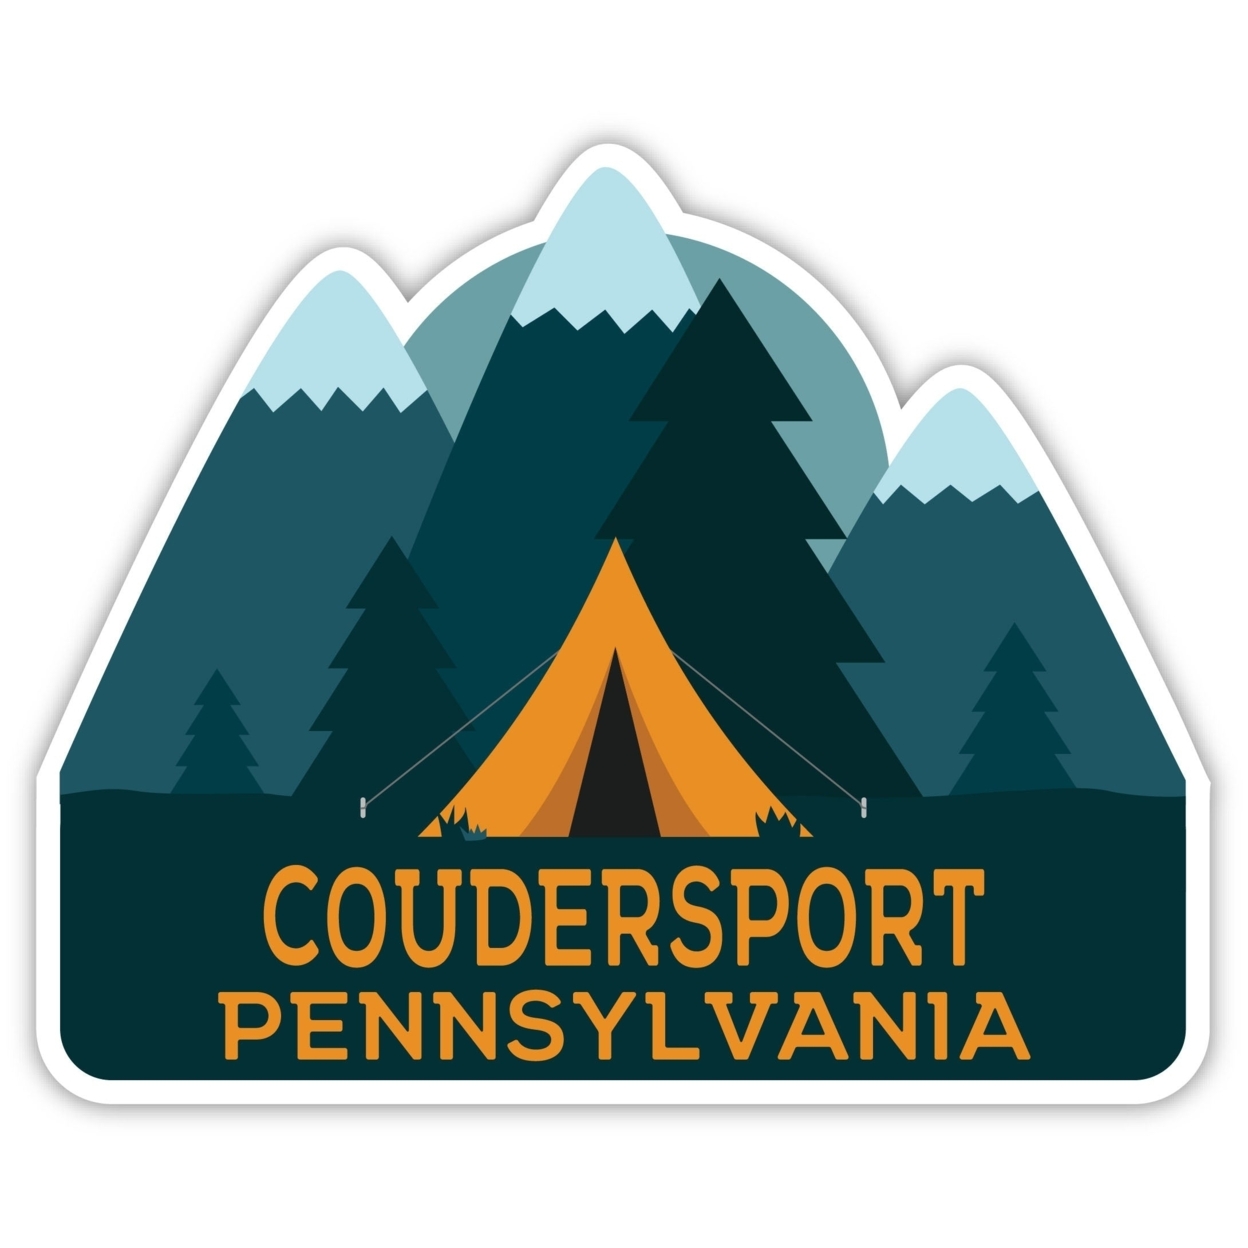 Coudersport Pennsylvania Souvenir Decorative Stickers (Choose Theme And Size) - 4-Pack, 2-Inch, Tent